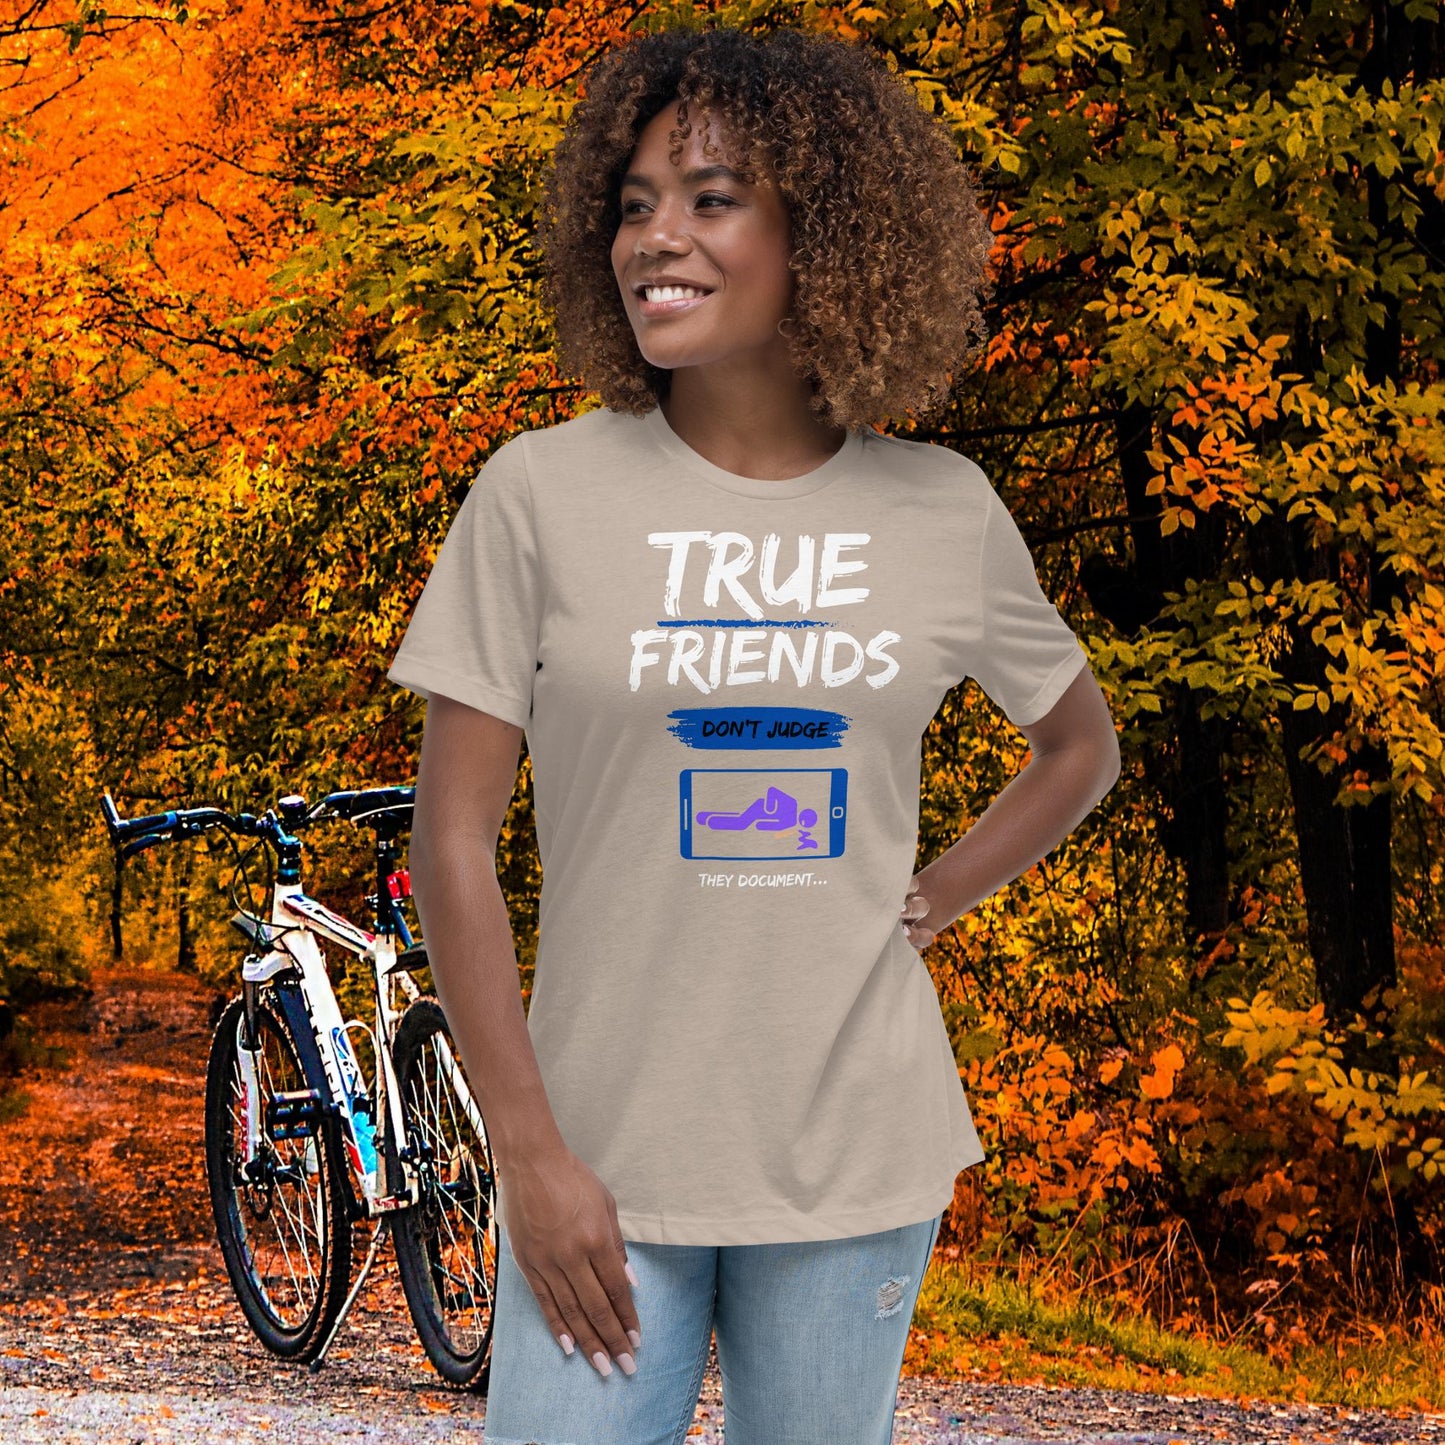 True Friends Don't Judge, They Document - Women's Relaxed T-Shirt